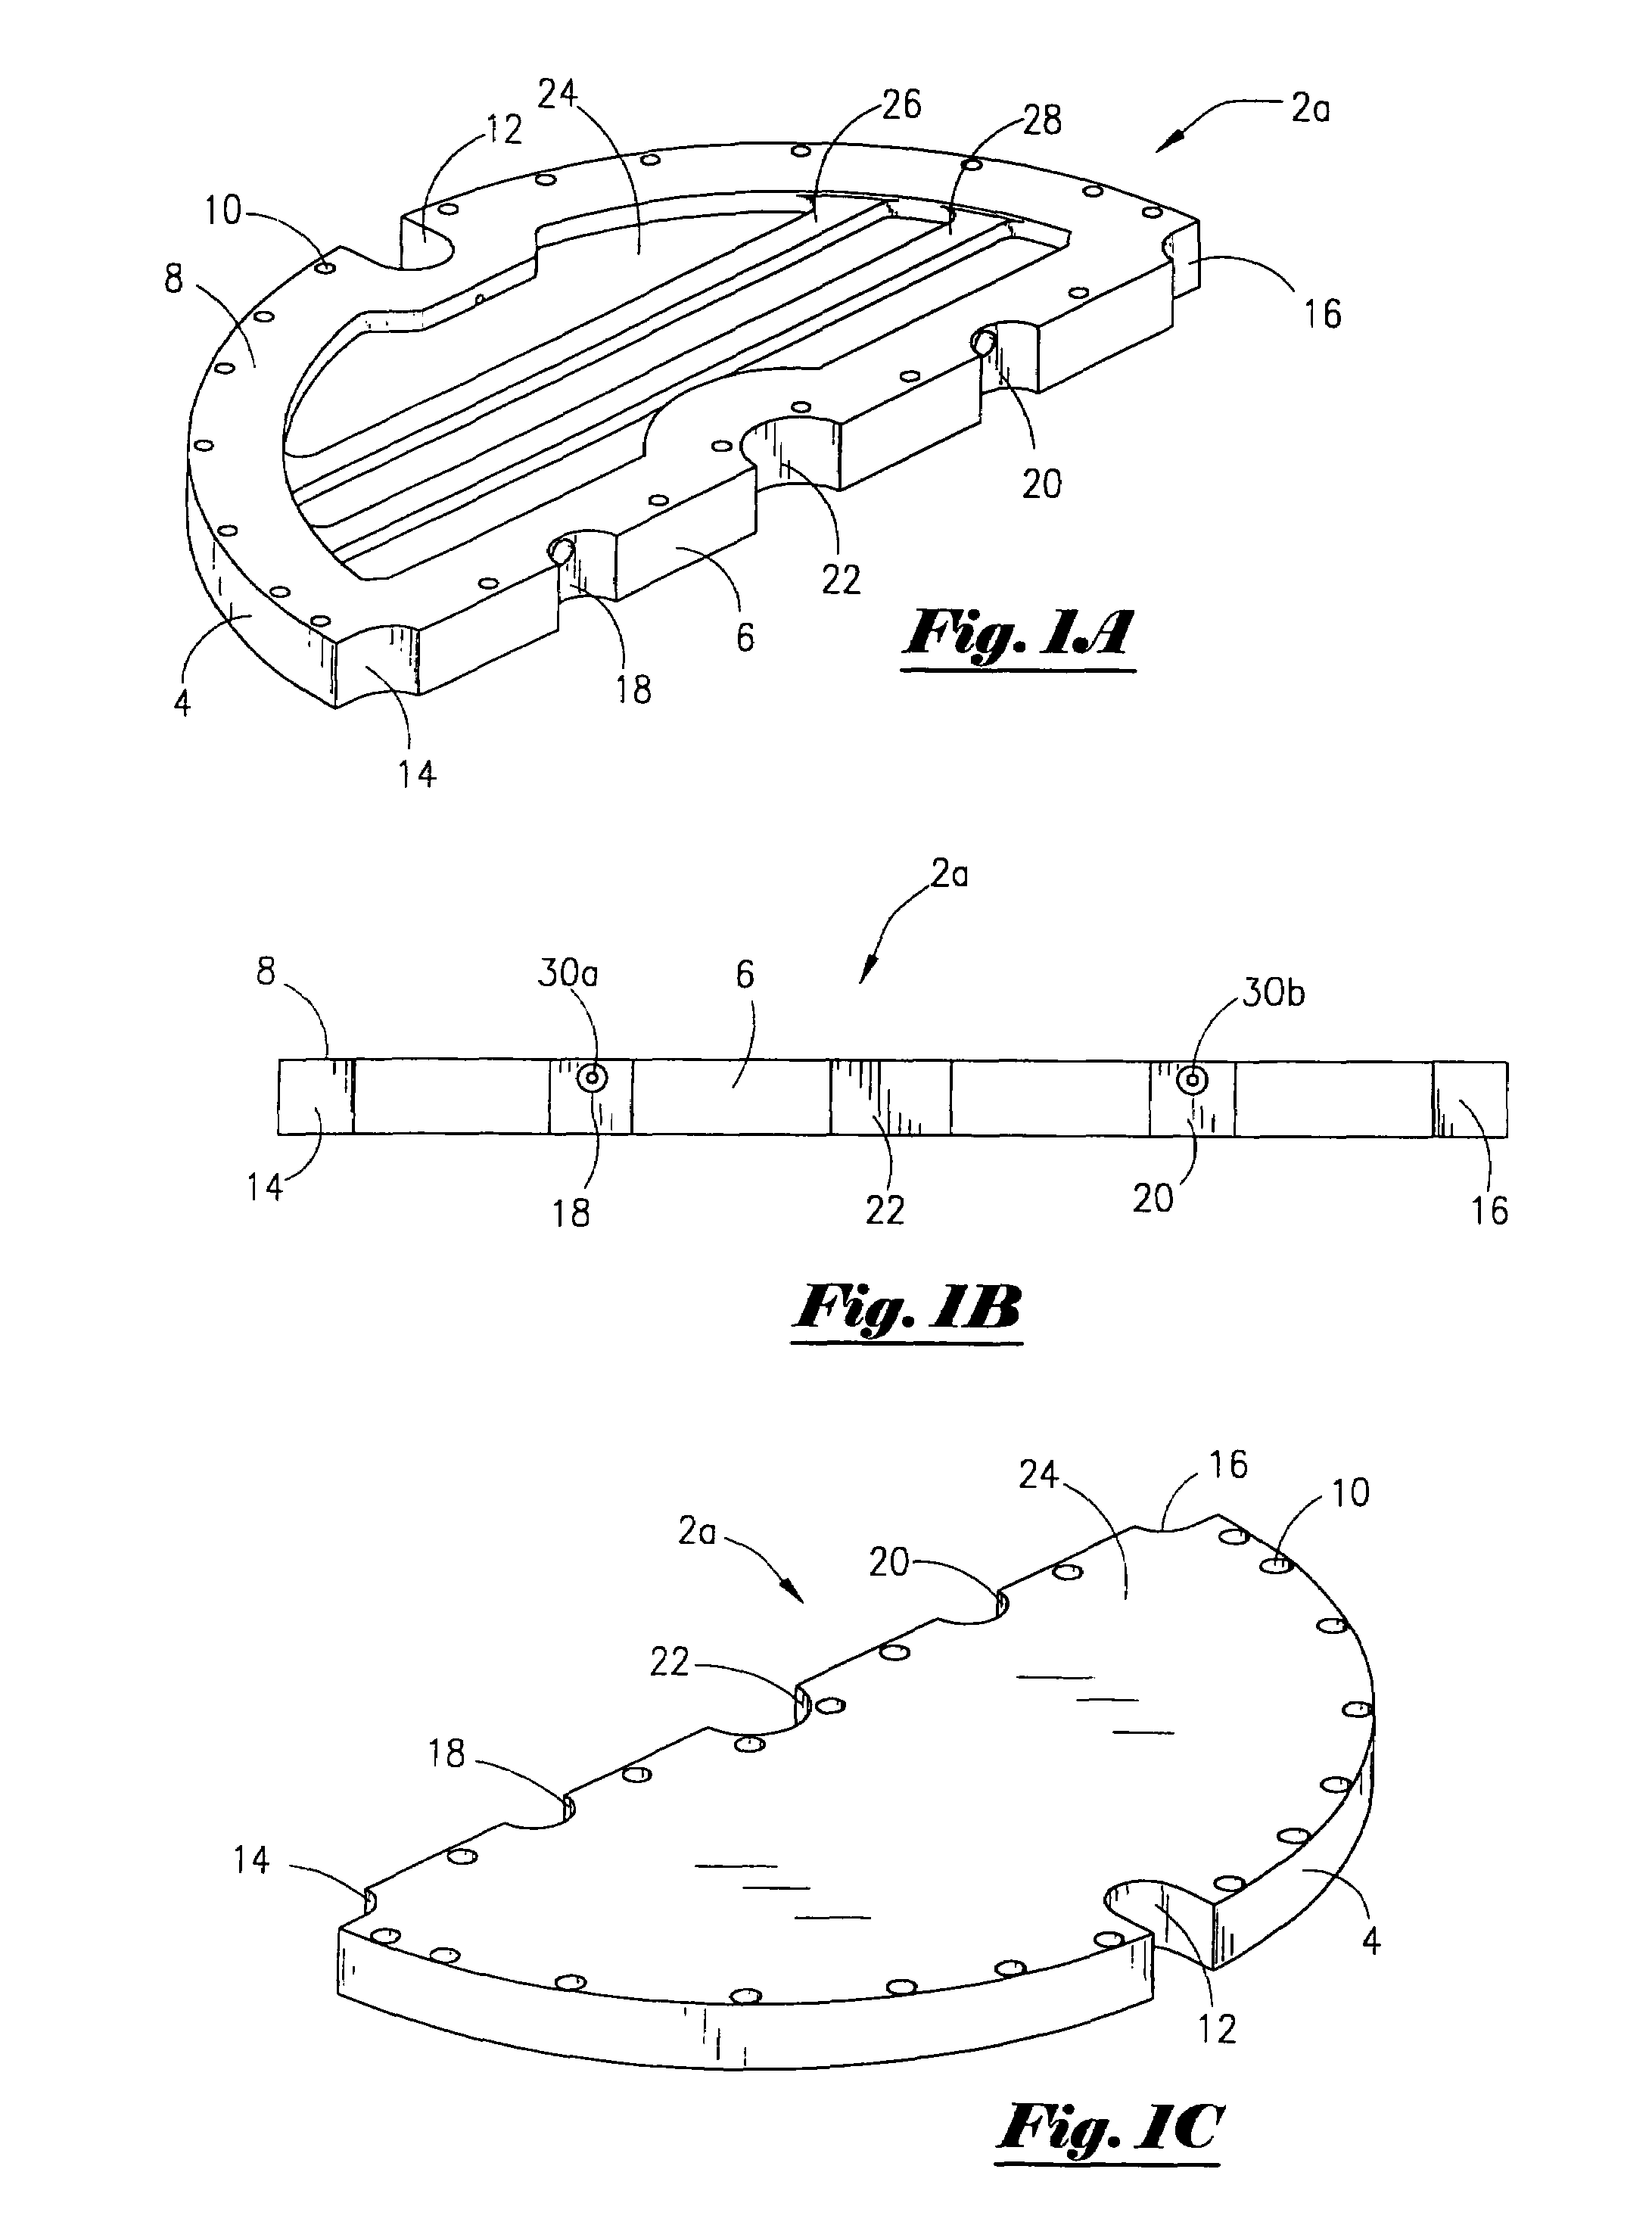 Process and system for blending components obtained from a stream